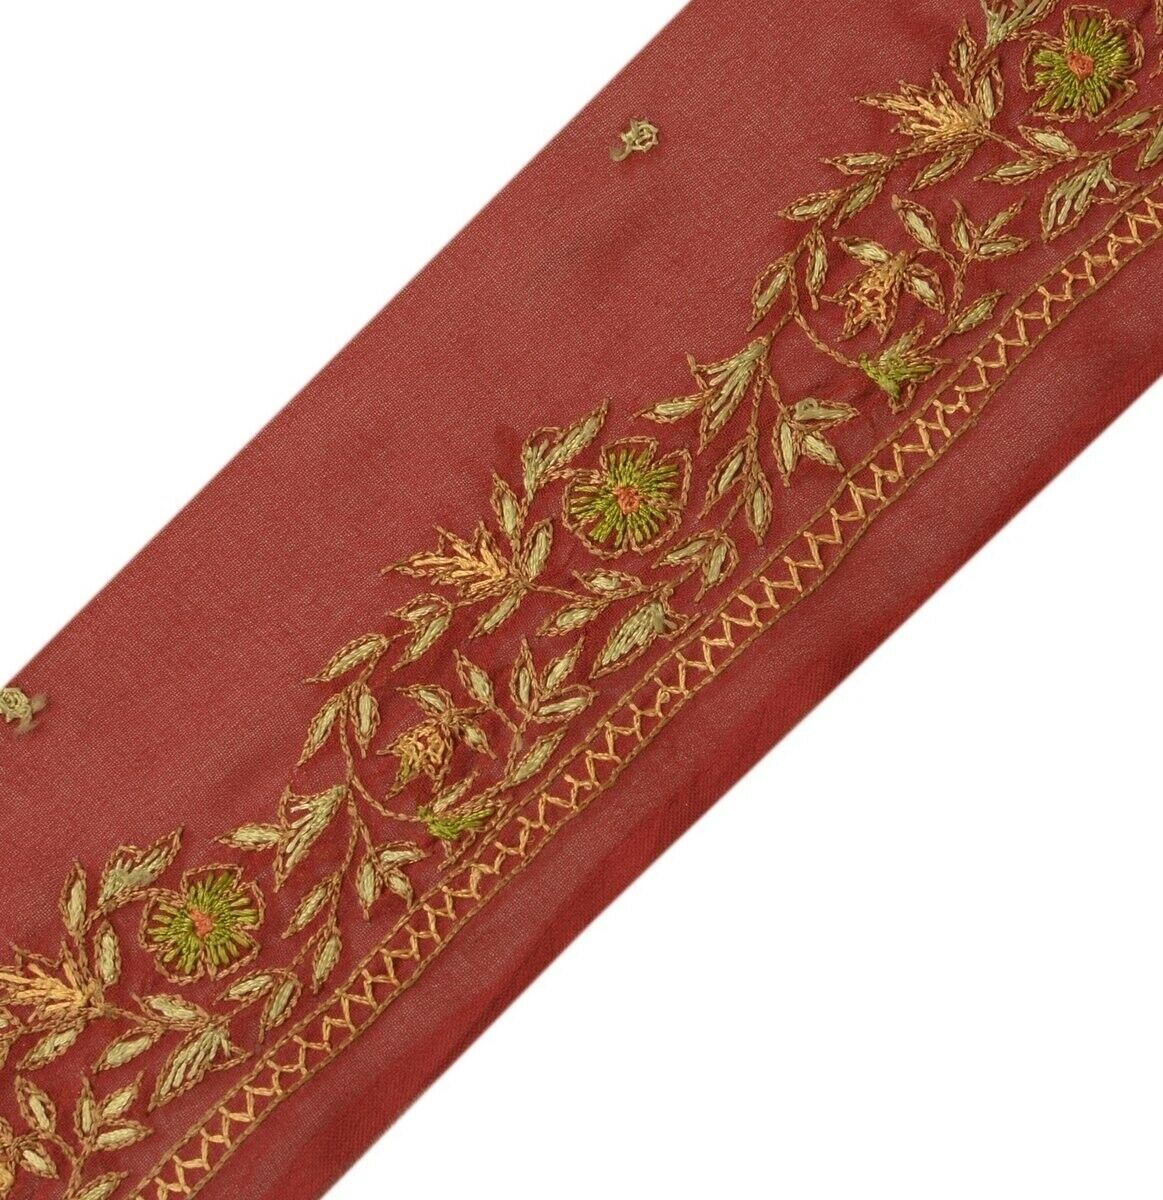 Vintage Sari Border Indian Craft Trim Hand Embroidered Deep Red Ribbon Lace